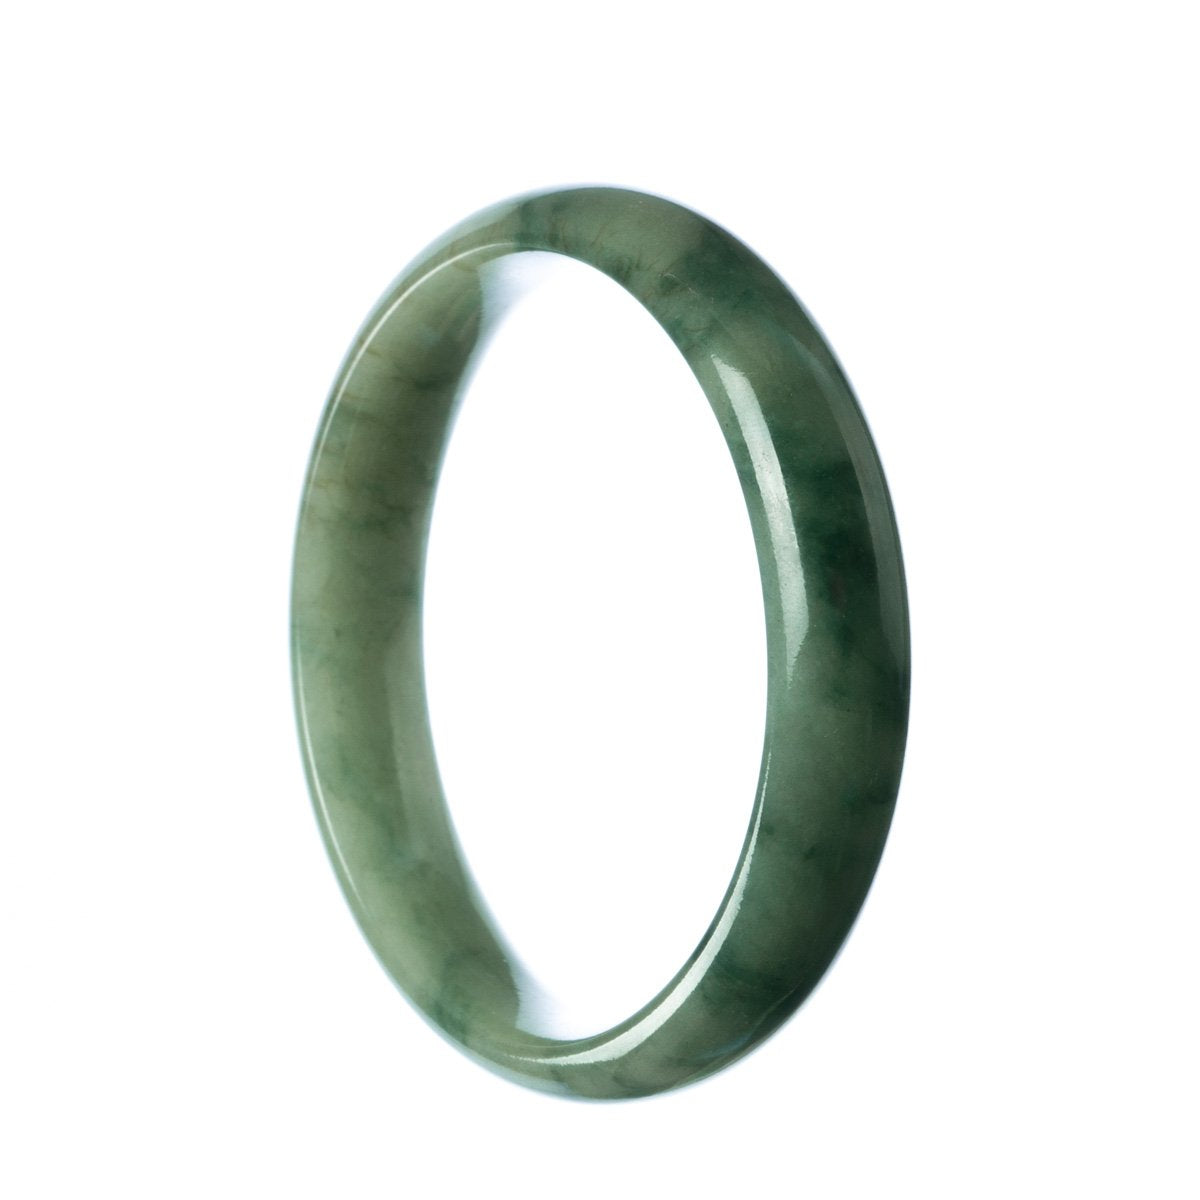 A beautiful half moon shaped green jade bangle bracelet, untreated and made with genuine traditional jade.